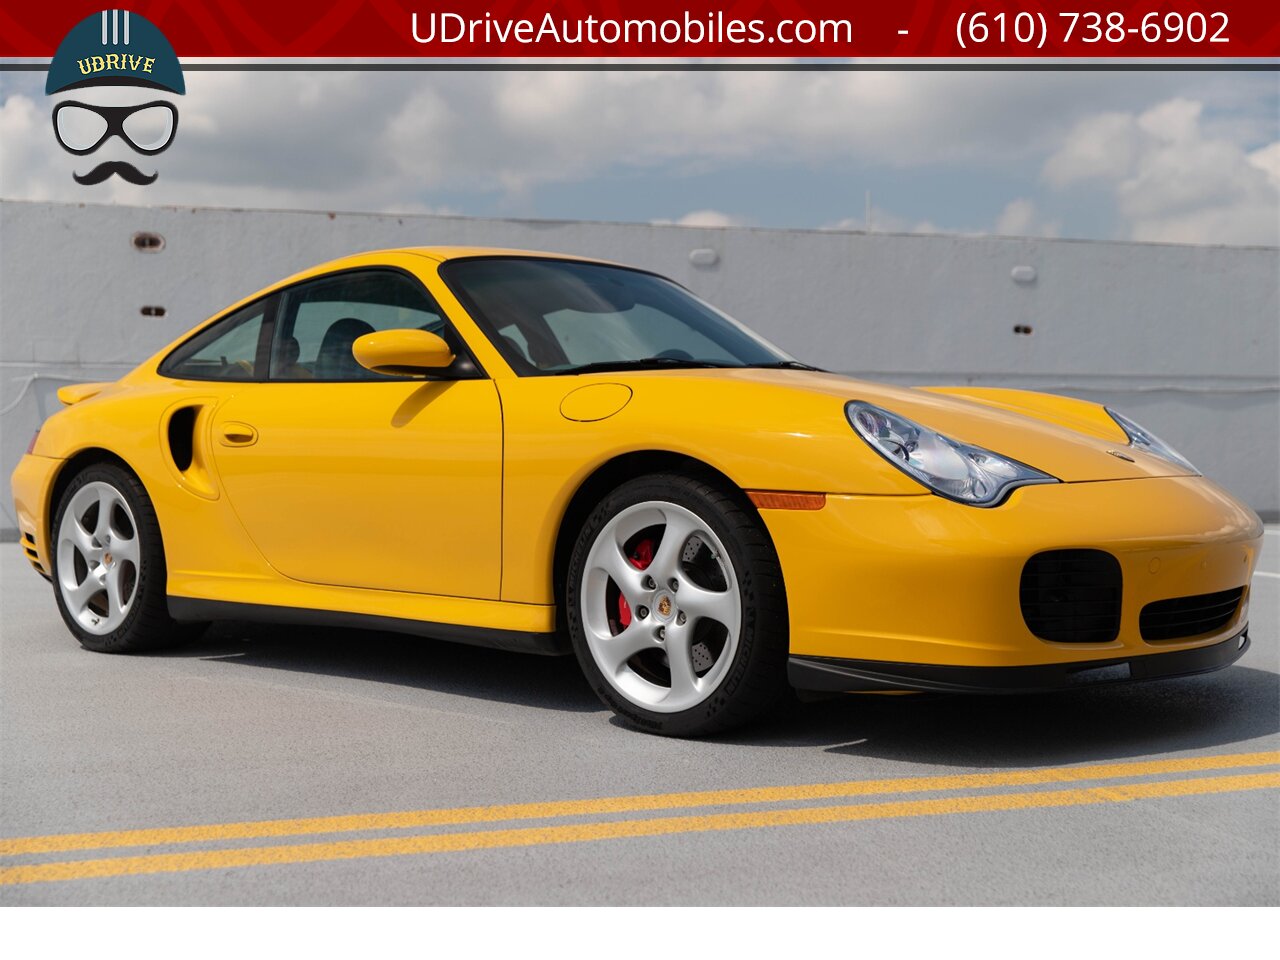 2003 Porsche 911 996 Turbo X50 6Sp Nephrite Green Lthr 9k Miles  Deviating Yellow Stitching Collector Grade BACK AGAIN - Photo 12 - West Chester, PA 19382